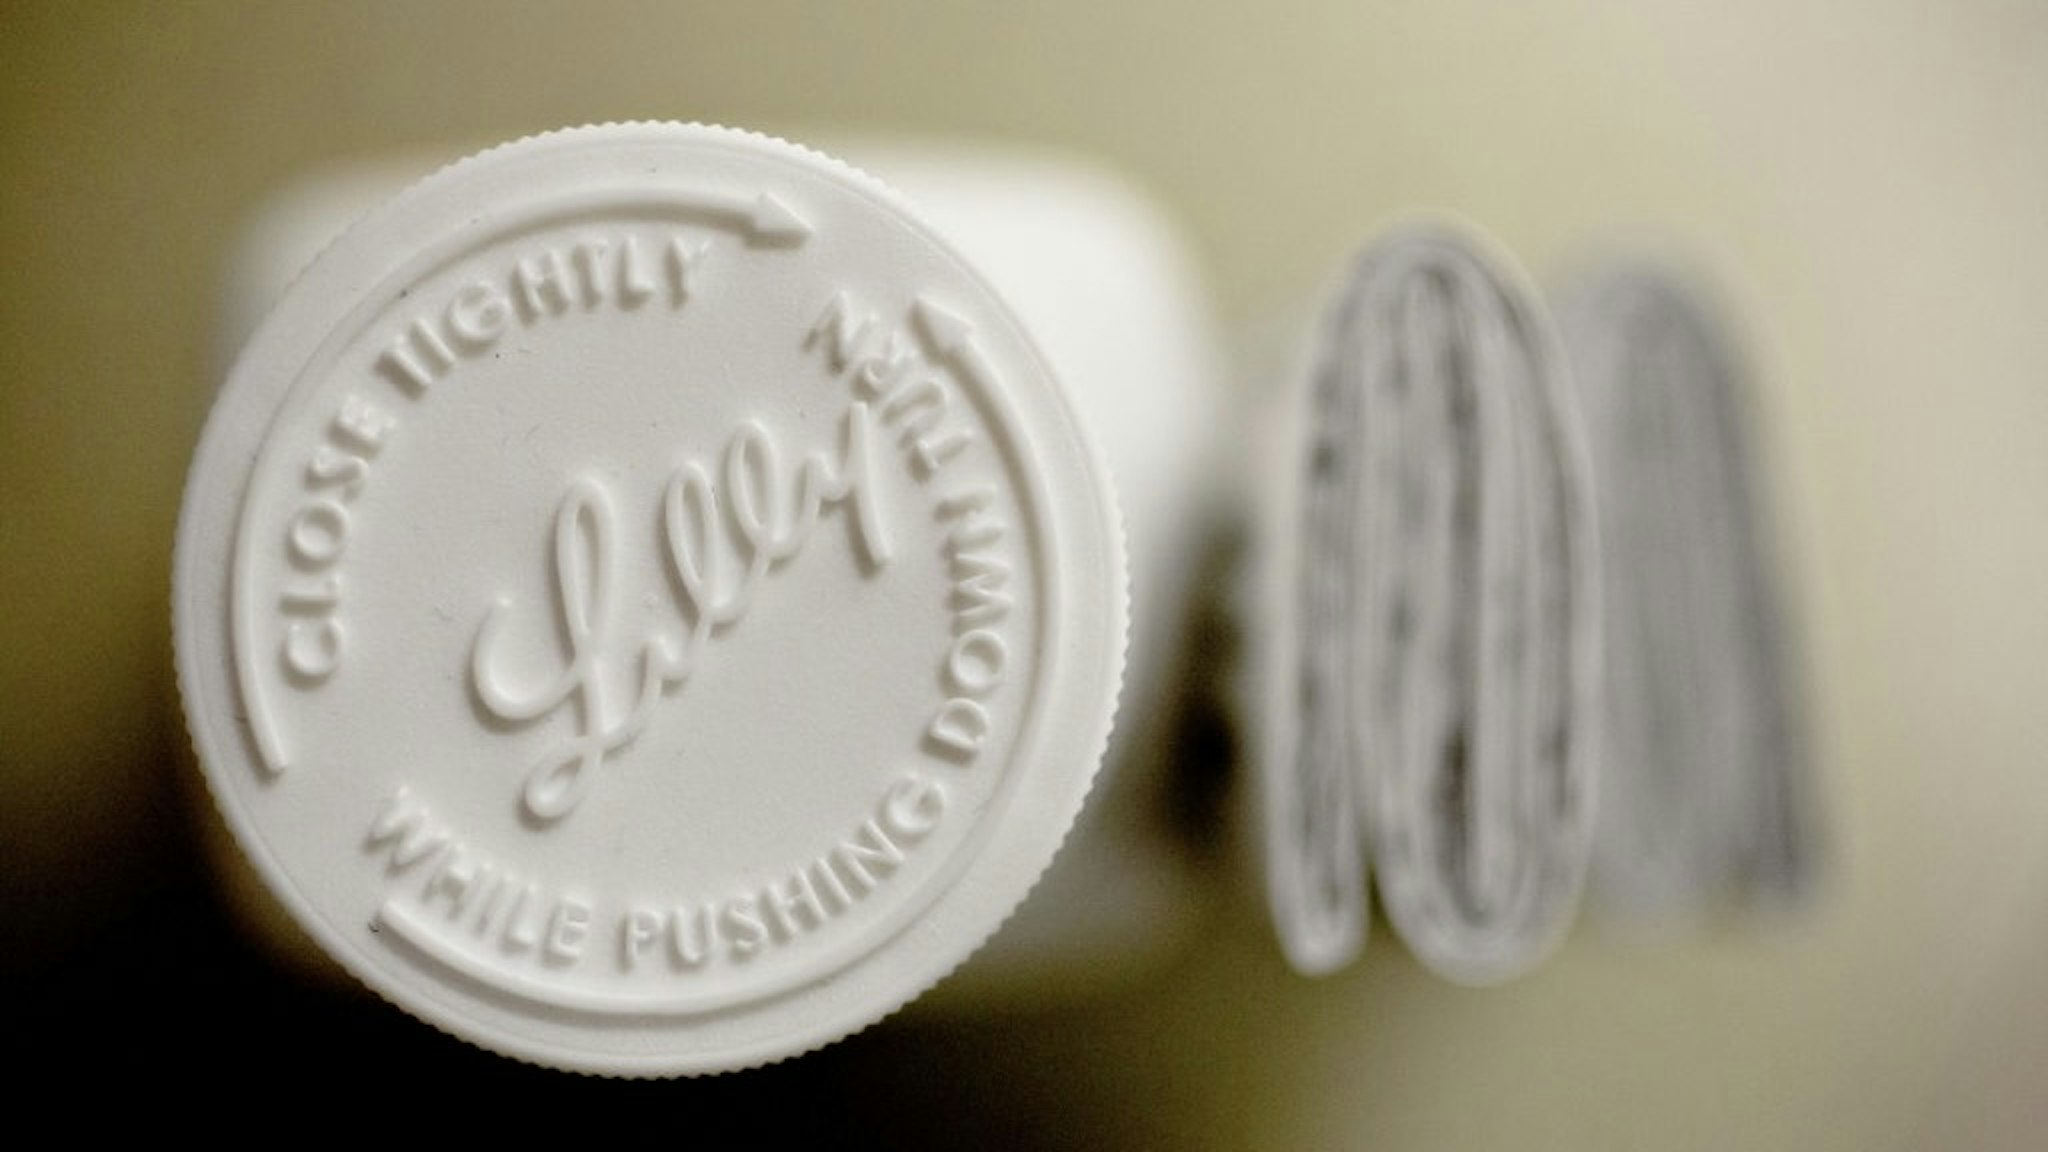 Eli Lilly & Co. Products Ahead Of Earnings Figures An Eli Lilly & Co. logo is seen on the cap of a pill bottle in this arranged photograph at a pharmacy in Princeton, Illinois, U.S., on Monday, Oct. 23, 2017. Eli Lilly is scheduled to release earnings figures on October 24. Photographer: Daniel Acker/Bloomberg via Getty Images Bloomberg / Contributor via Getty Images